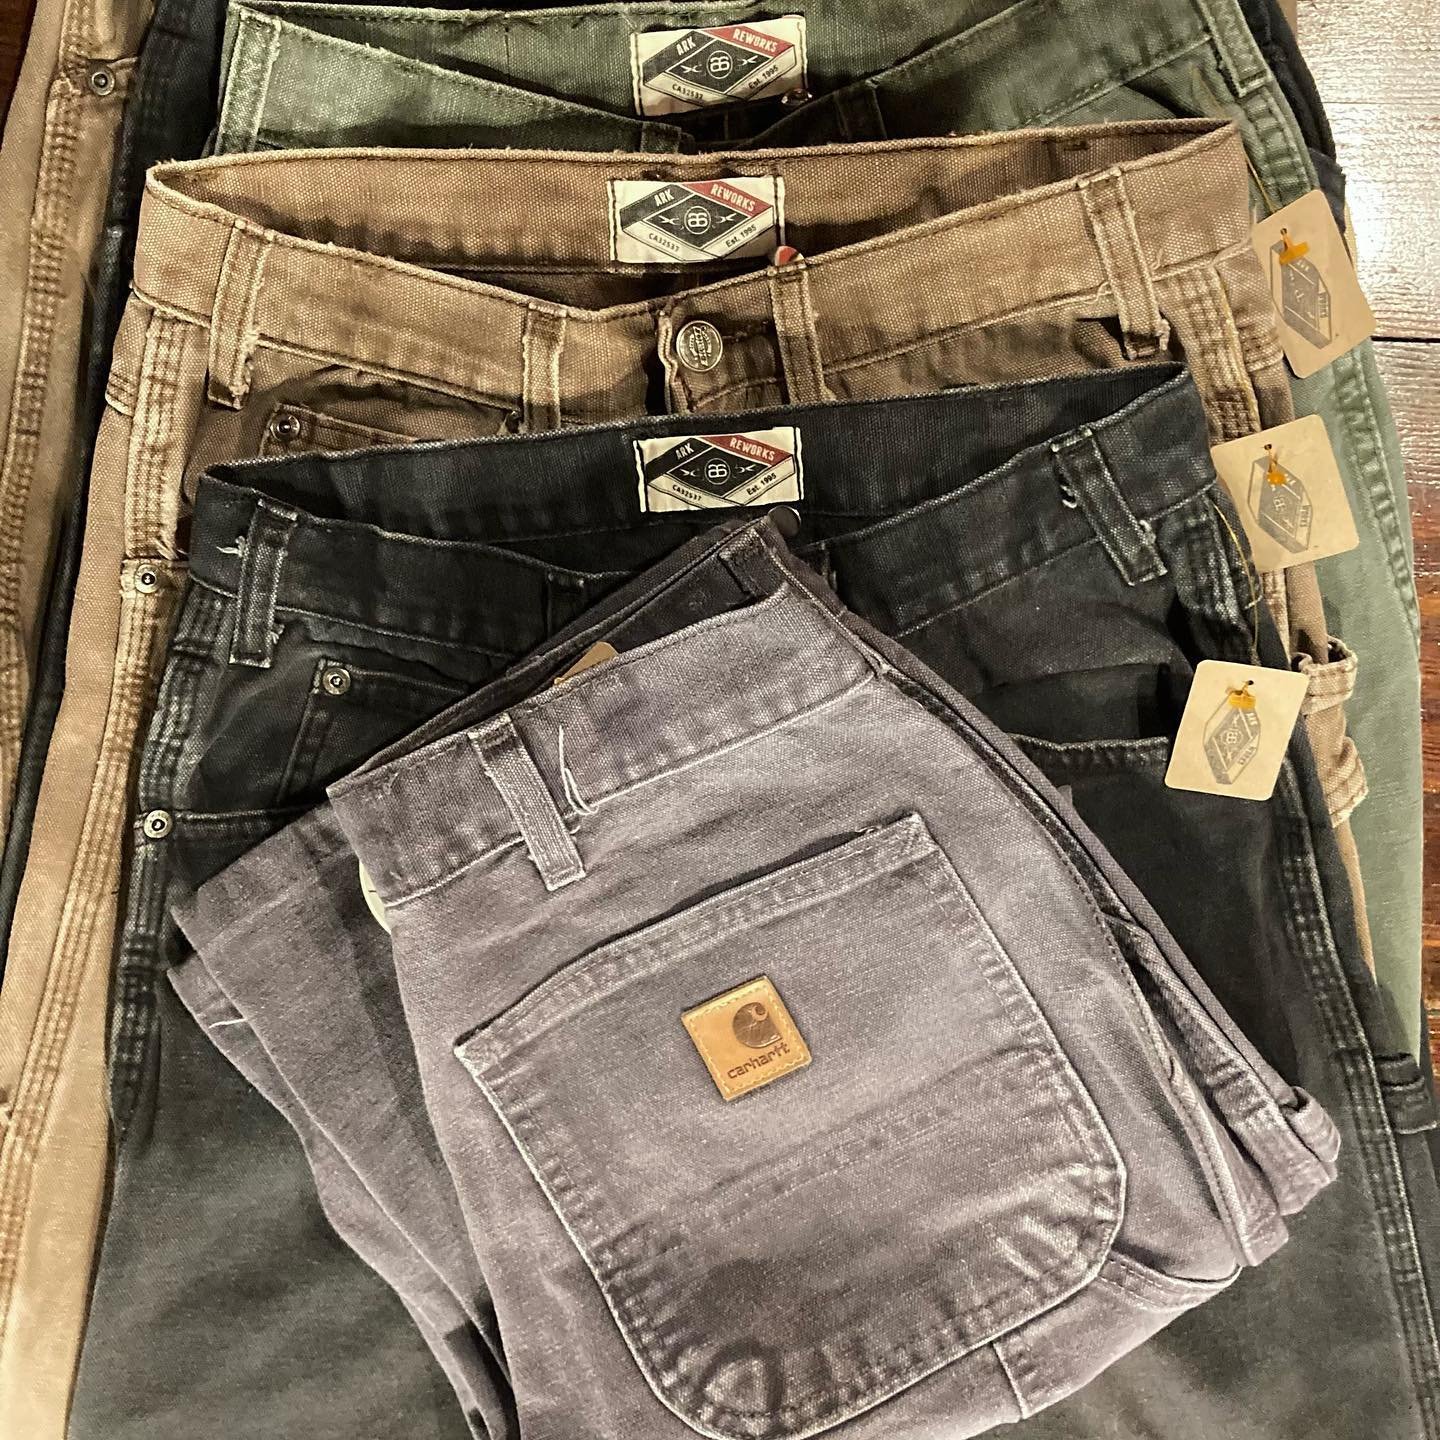 Just dropped at @mintagecafe on Robson. Our reworked Carhartt and Dickies painter pants. All sizes  24-33. They will go fast! 😎